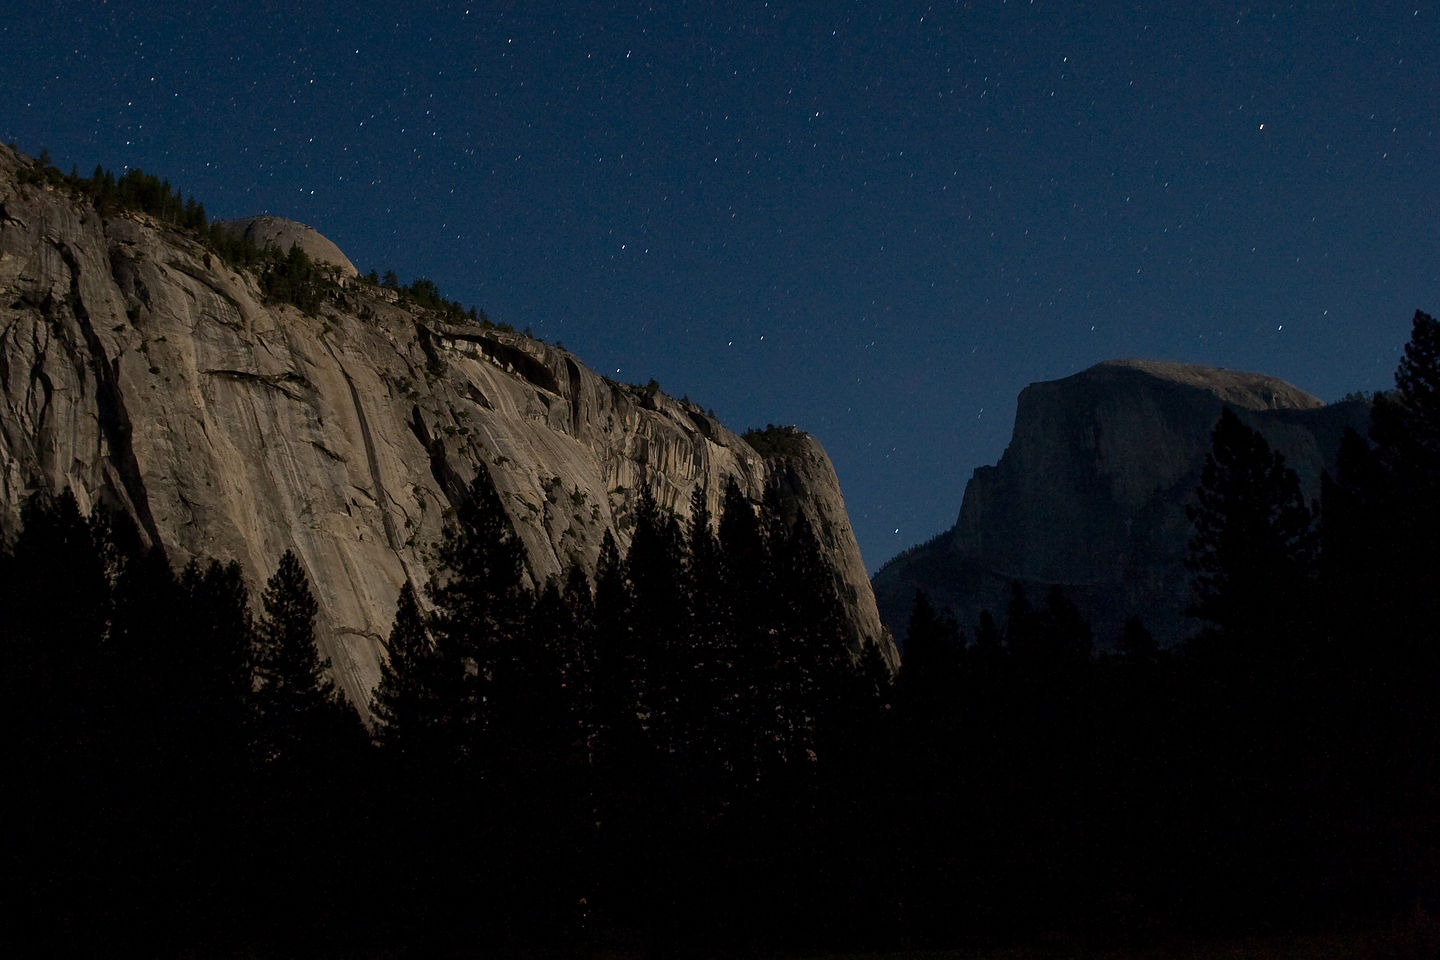 Half Dome and Royal Arches by starlight